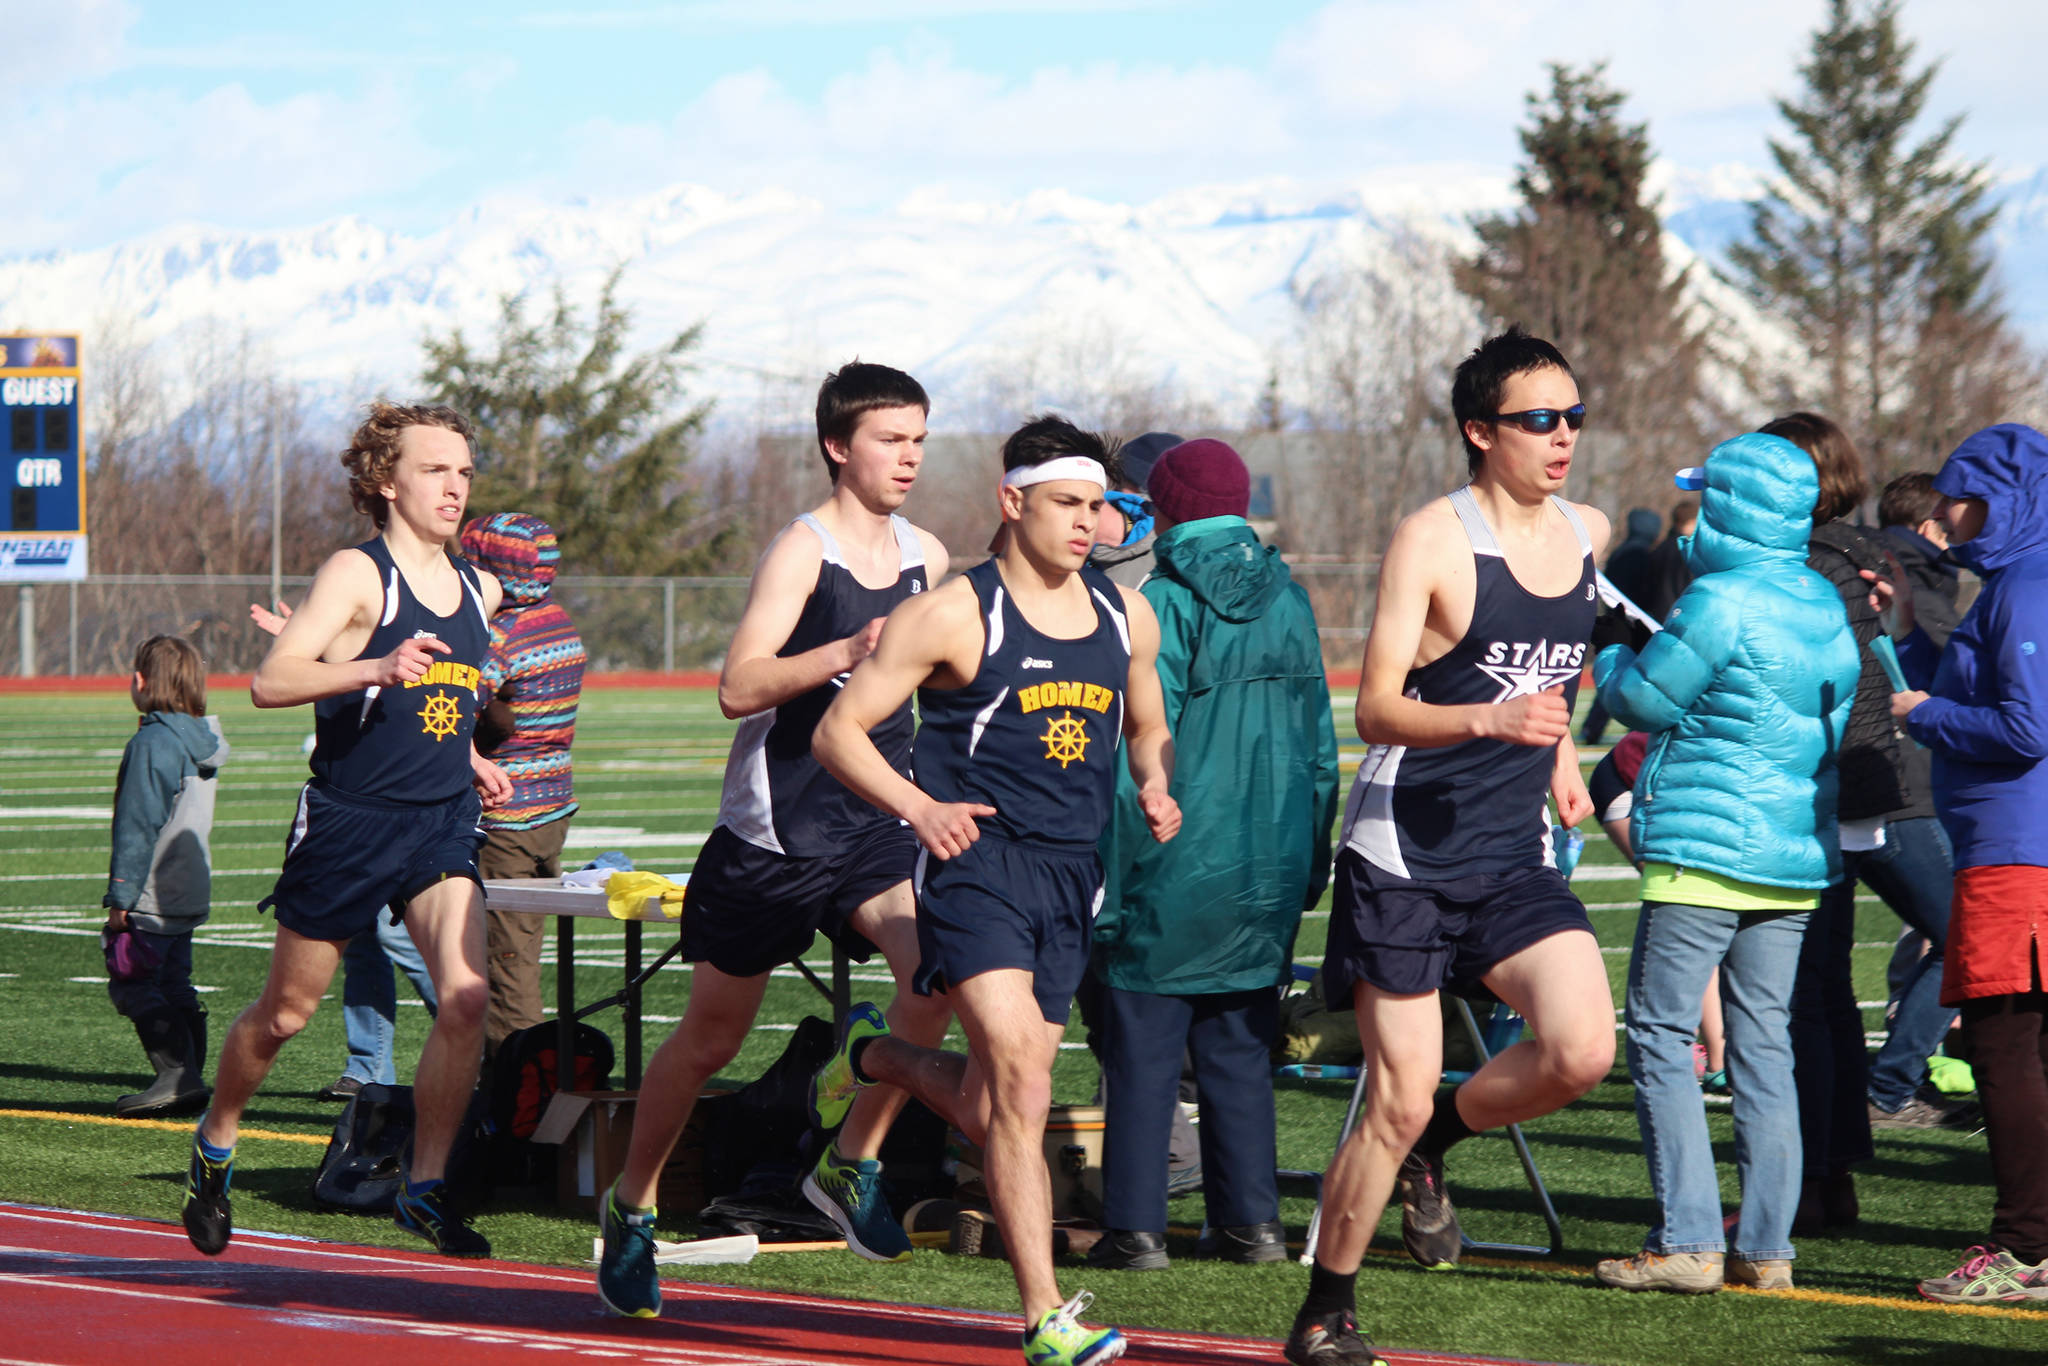 Homer’s Jacob Davis, Soldotna’s Josh Shuler, Homer’s Luciano Fasulo and Soldotna’s Sean Vergin lead the boys’ 1,600-meter run Friday, April 13, 2018, at Homer High School in Homer, Alaska. Fasulo took first in the event at the dual meet between the two schools. (Photo by Megan Pacer/Homer News)